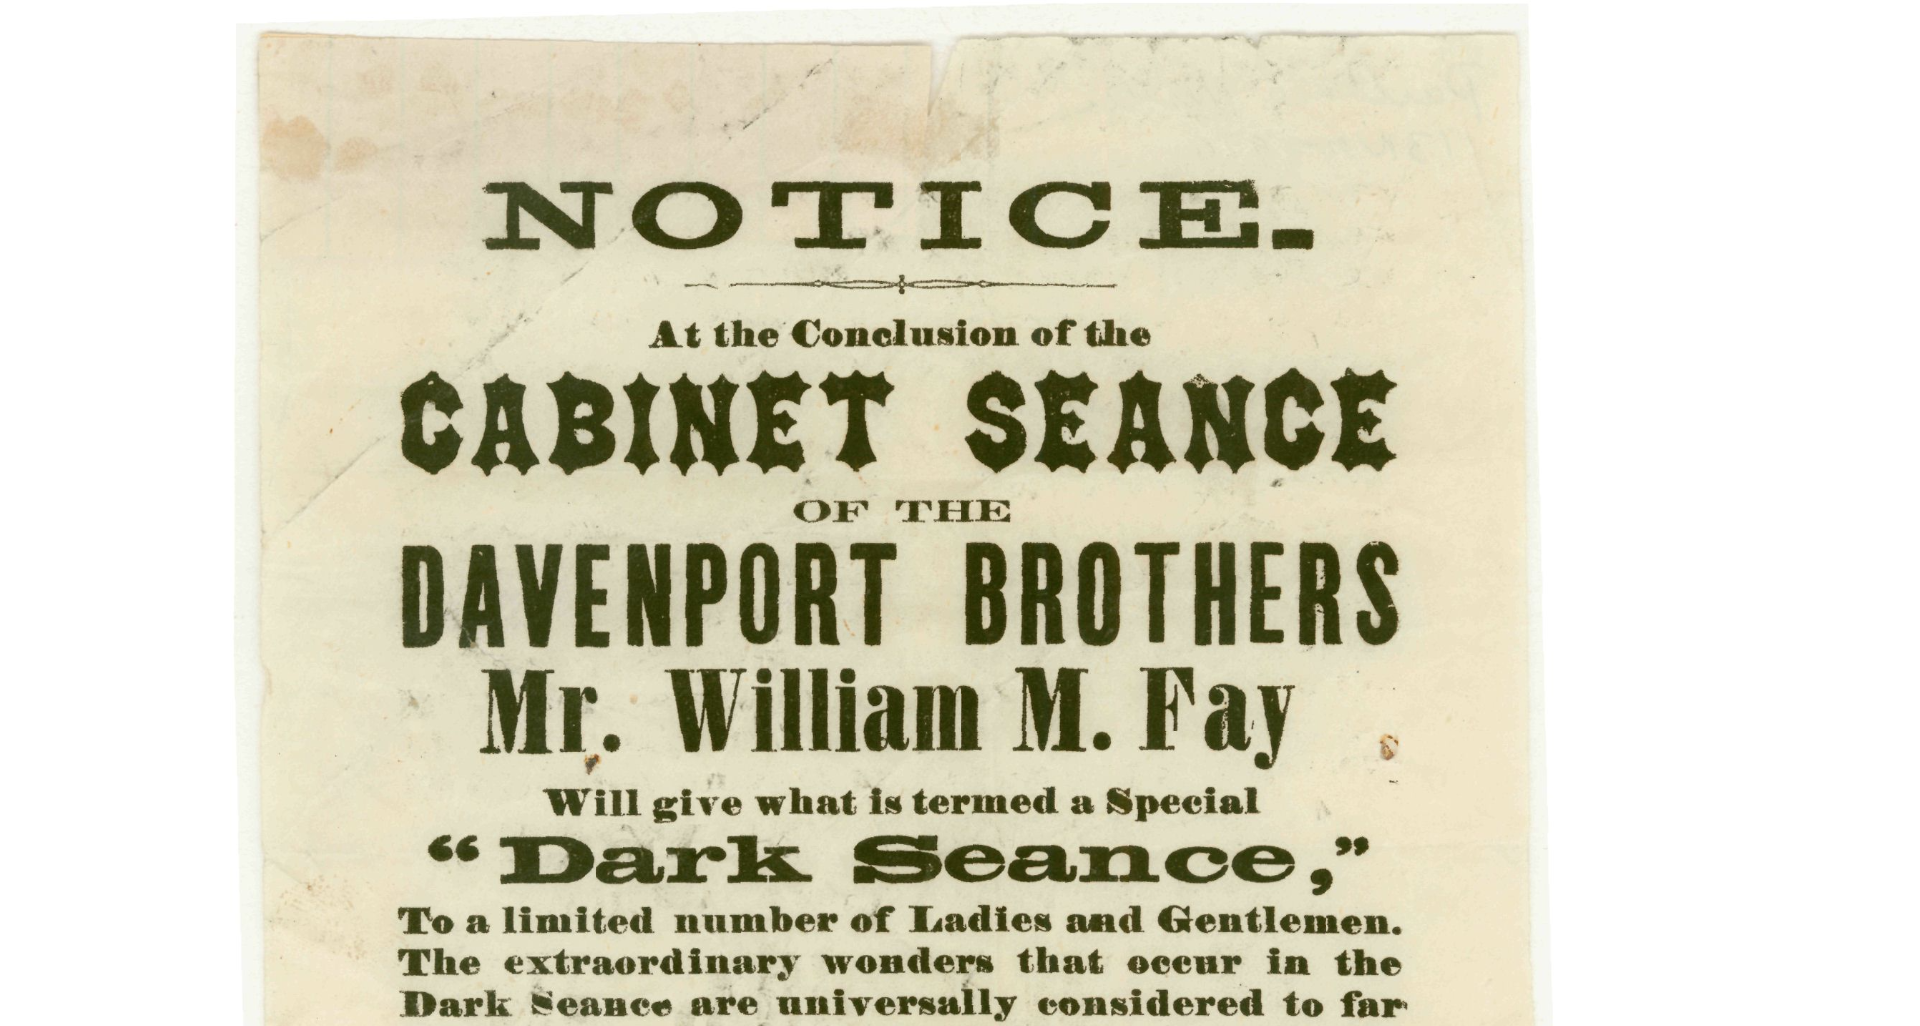 Notice! At the conclusion of the cabinet seance of the Davenport Brothers Mr. William M. Fay ... (1860) from Readex: Readex AllSearch